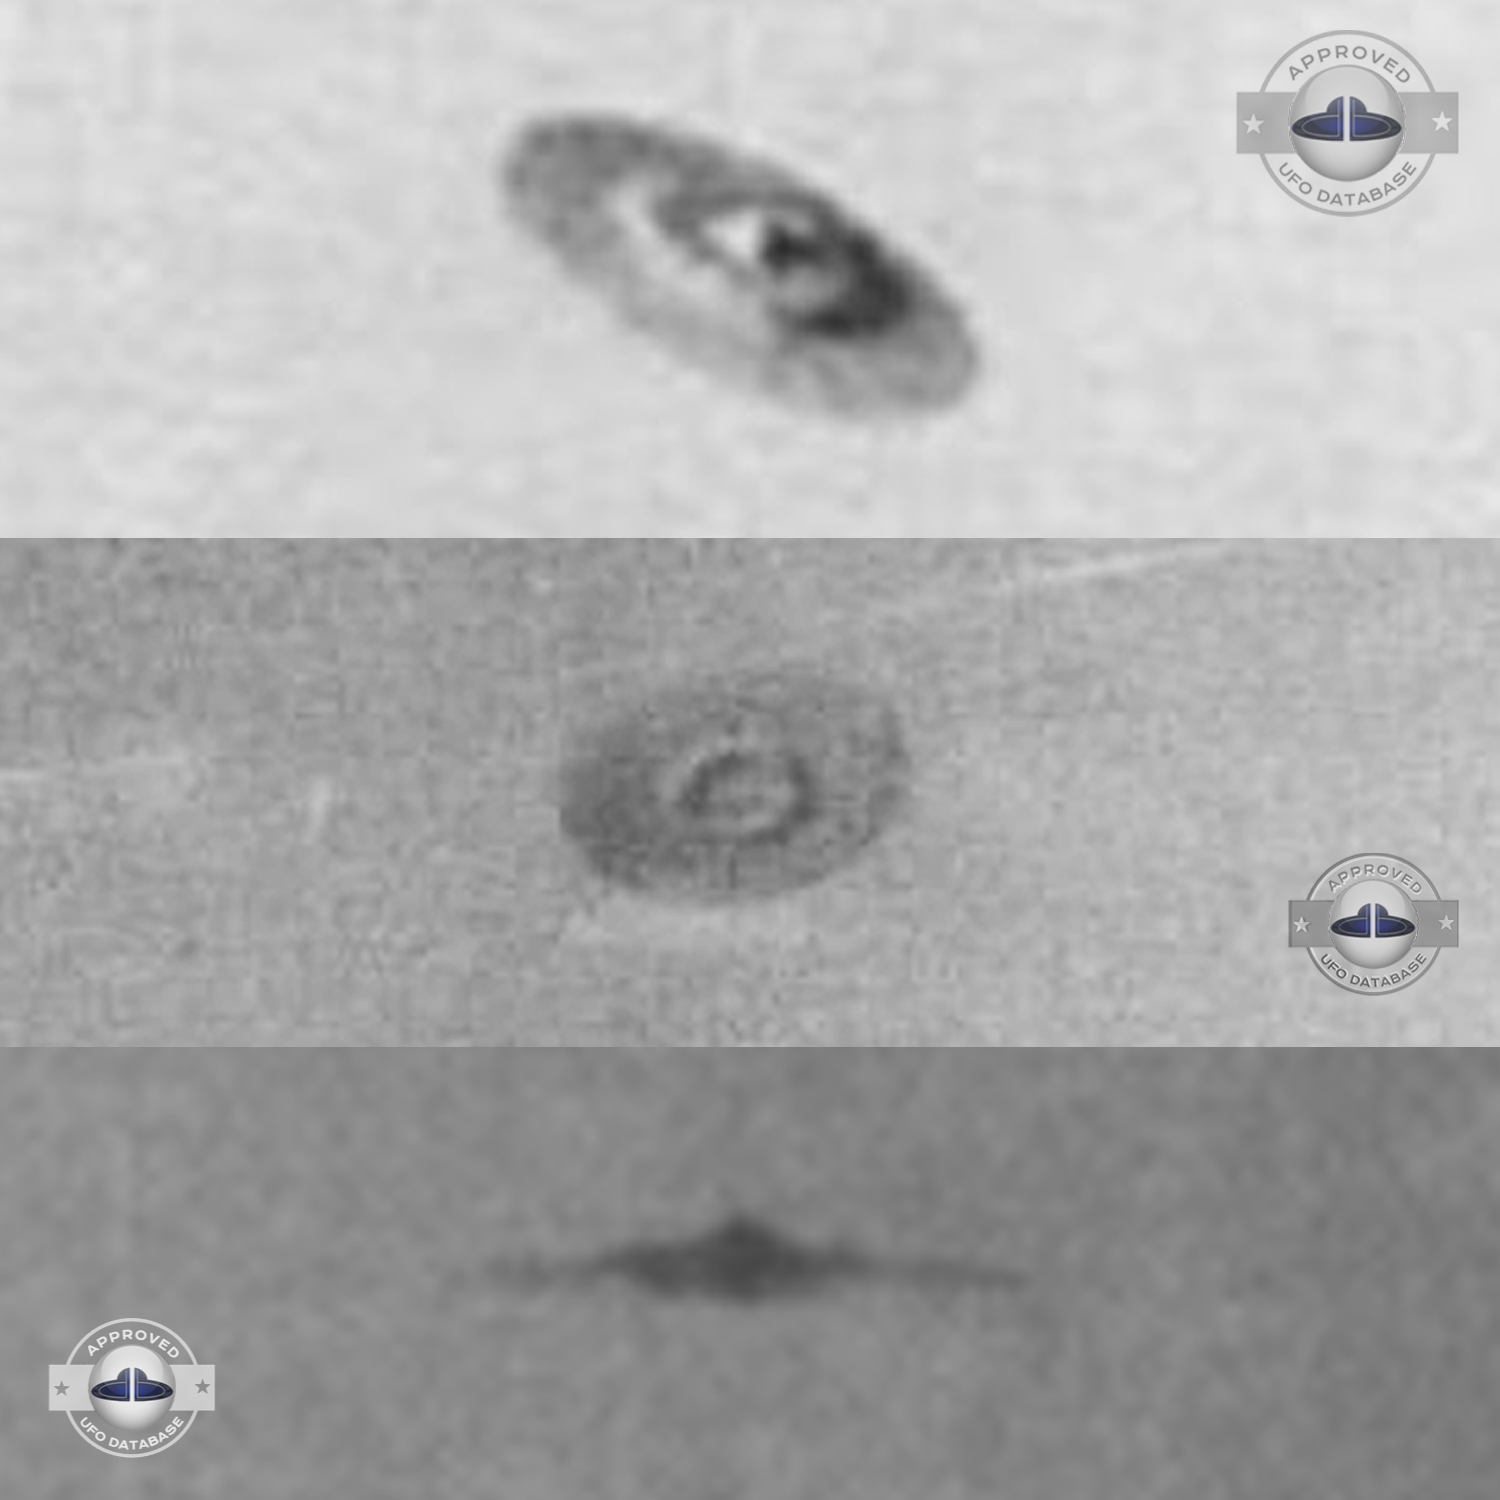 UFO picture considered by A.P.R.O | one of the best ufo picture 1952 UFO Picture #122-8